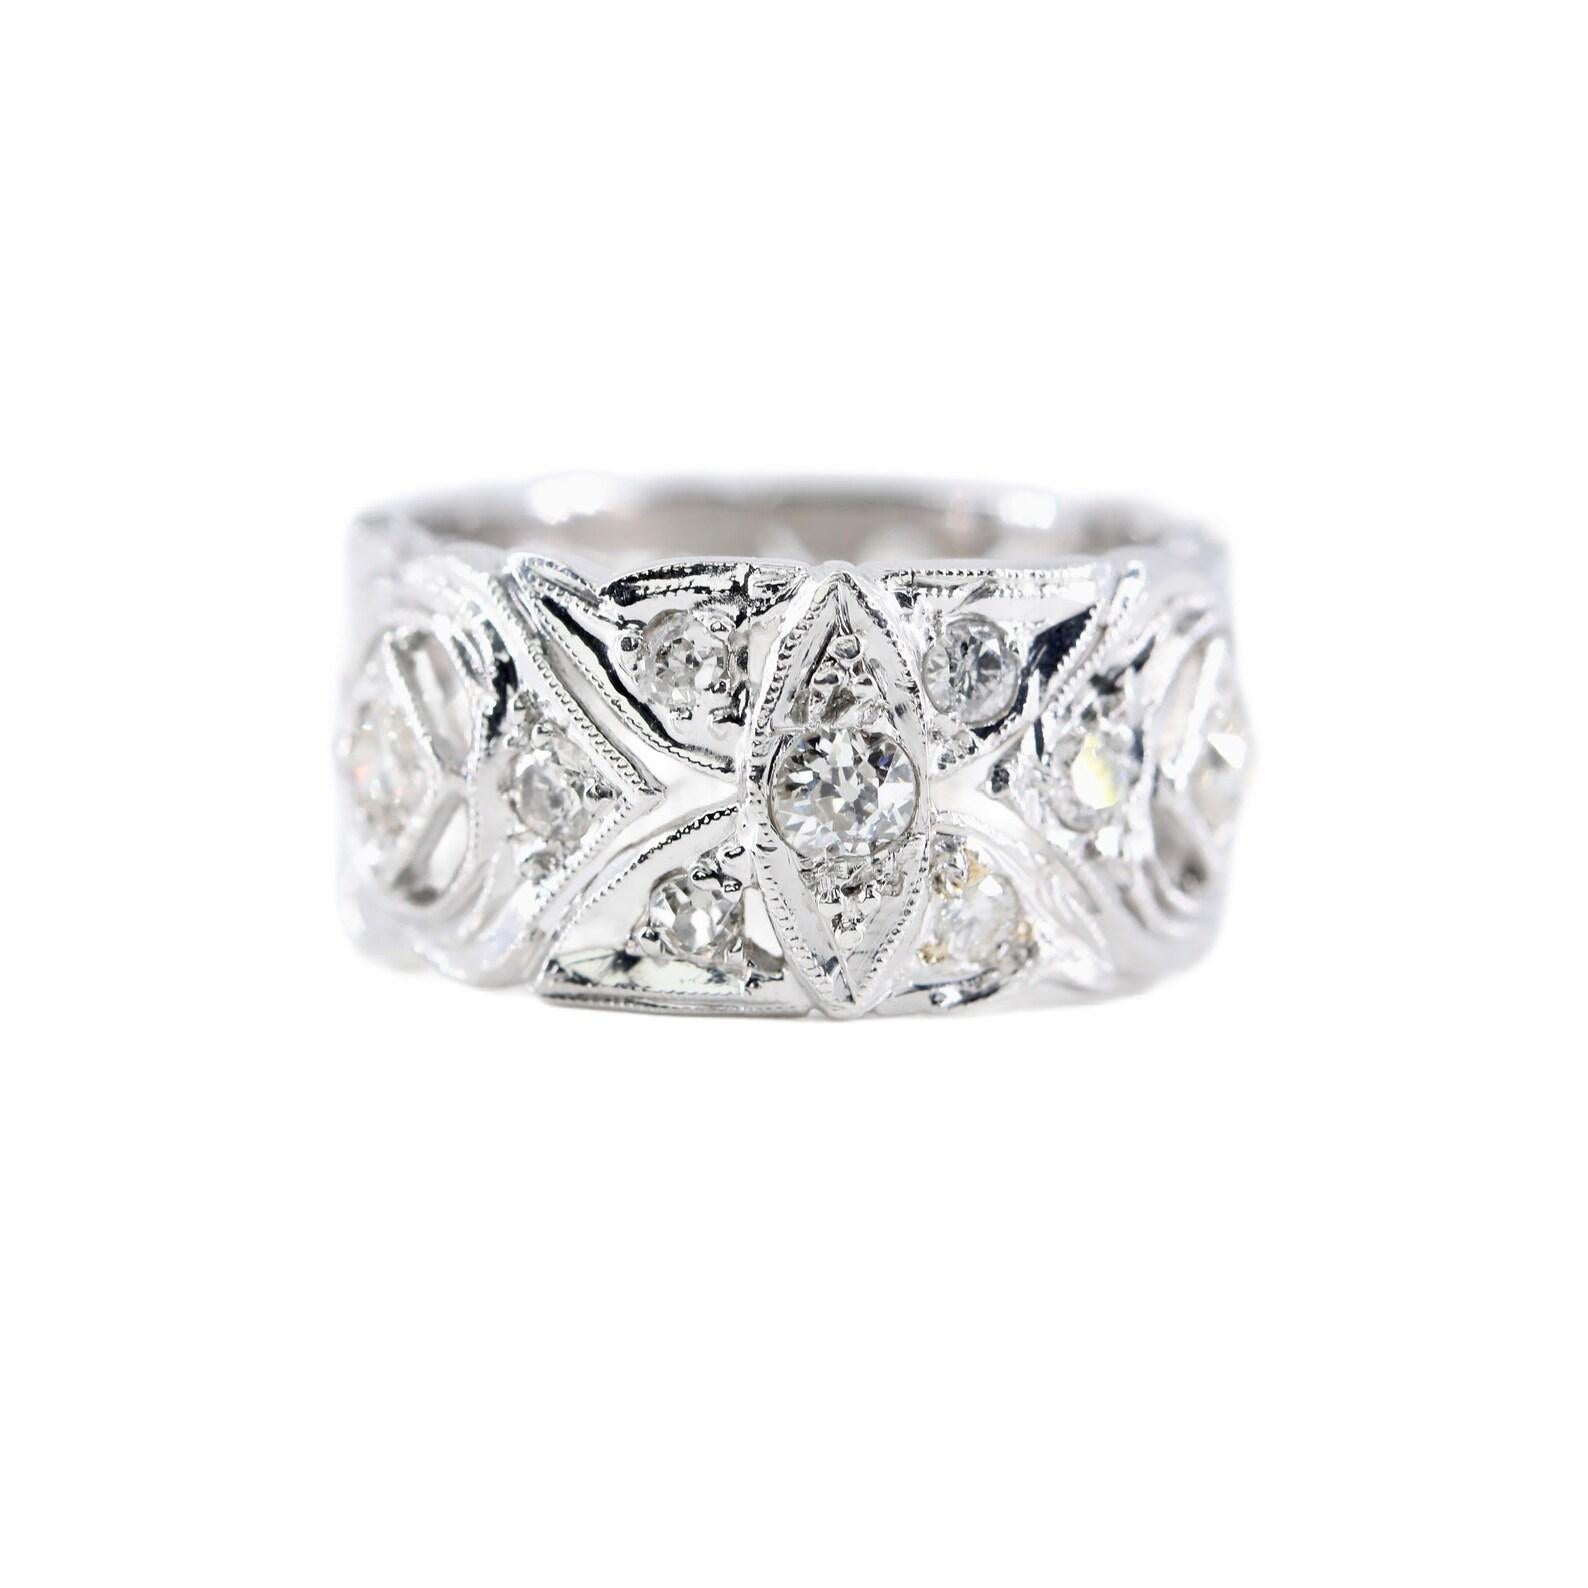 A wide diamond eternity band ring in platinum. Set throughout with 1.10ctw of old European cut diamonds of H color, VS to SI clarity. Accented by miligrain beading, and hand pierced filigree work in a traditional Art Deco manner.

Ring tests as